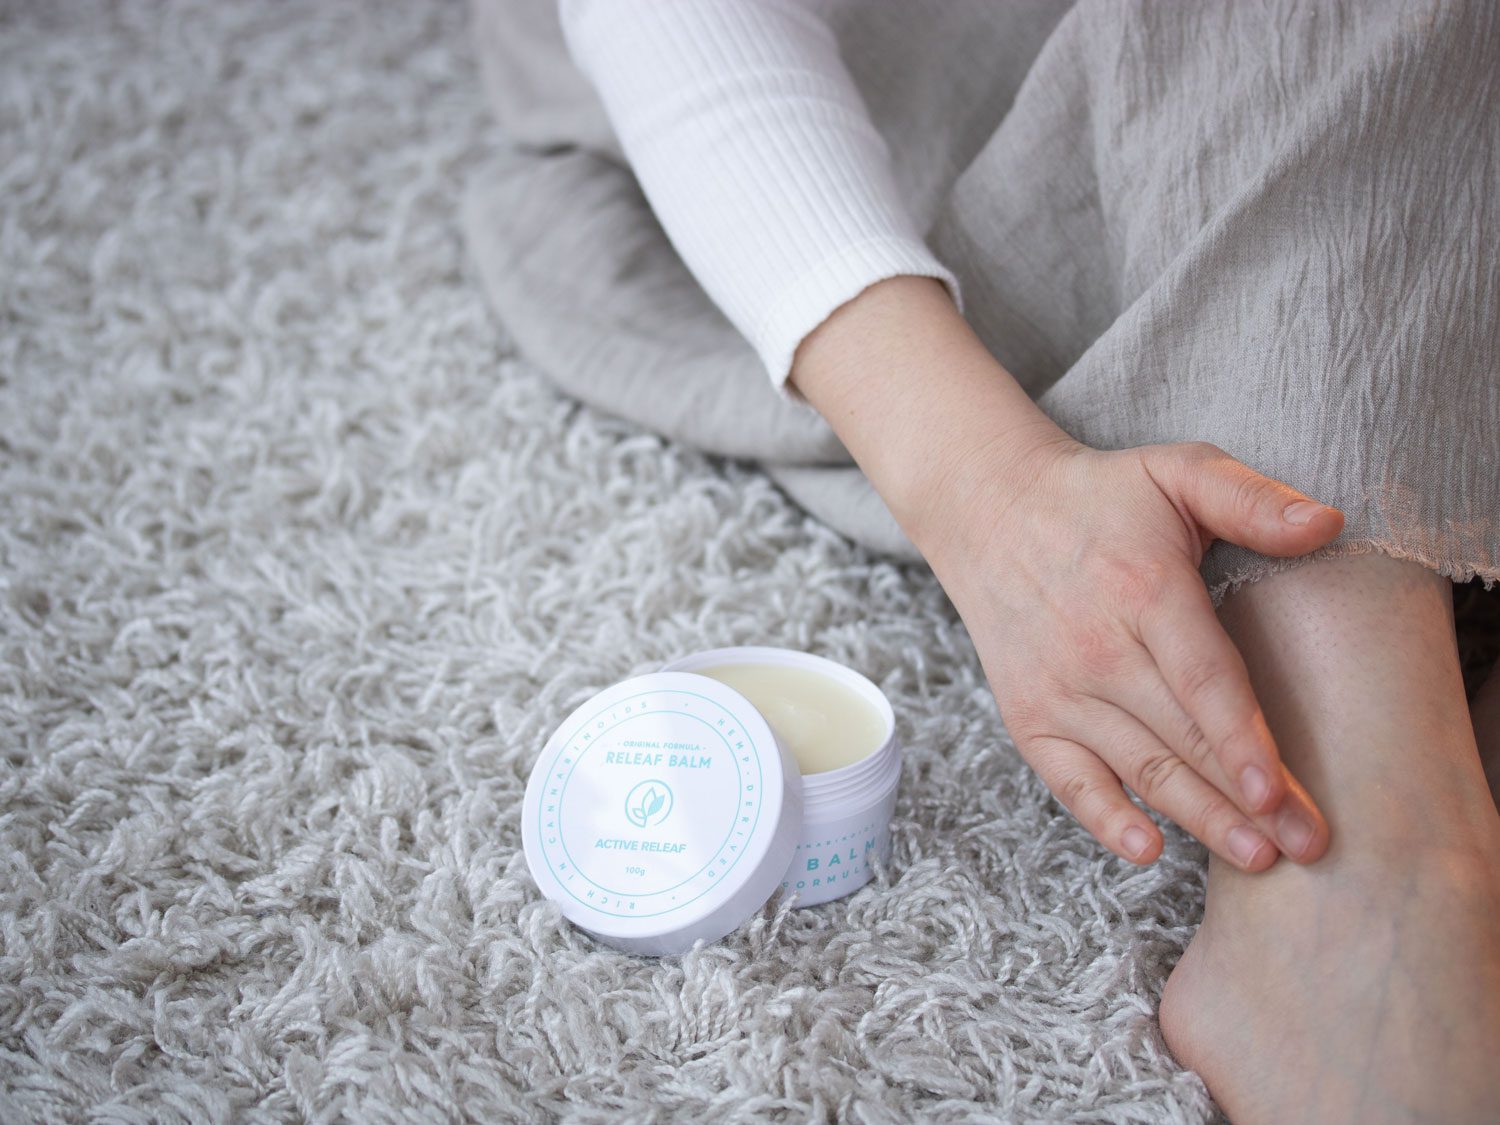 Releaf Balm Applied to Ankles